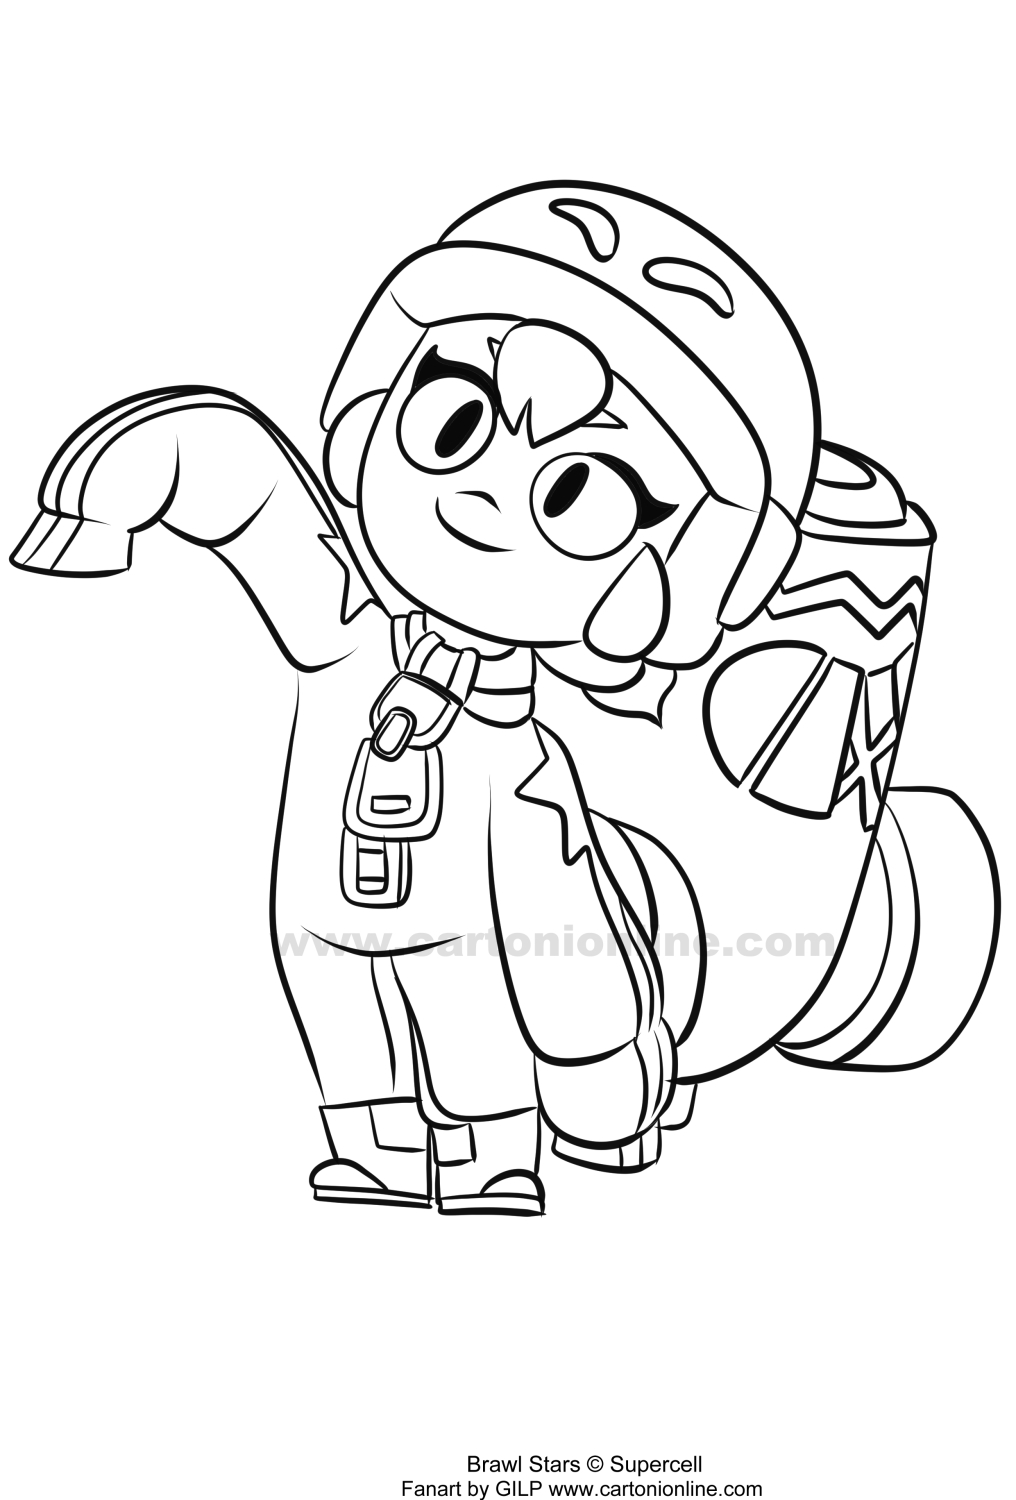 Bonnie 02 from Brawl Stars coloring page to print and coloring